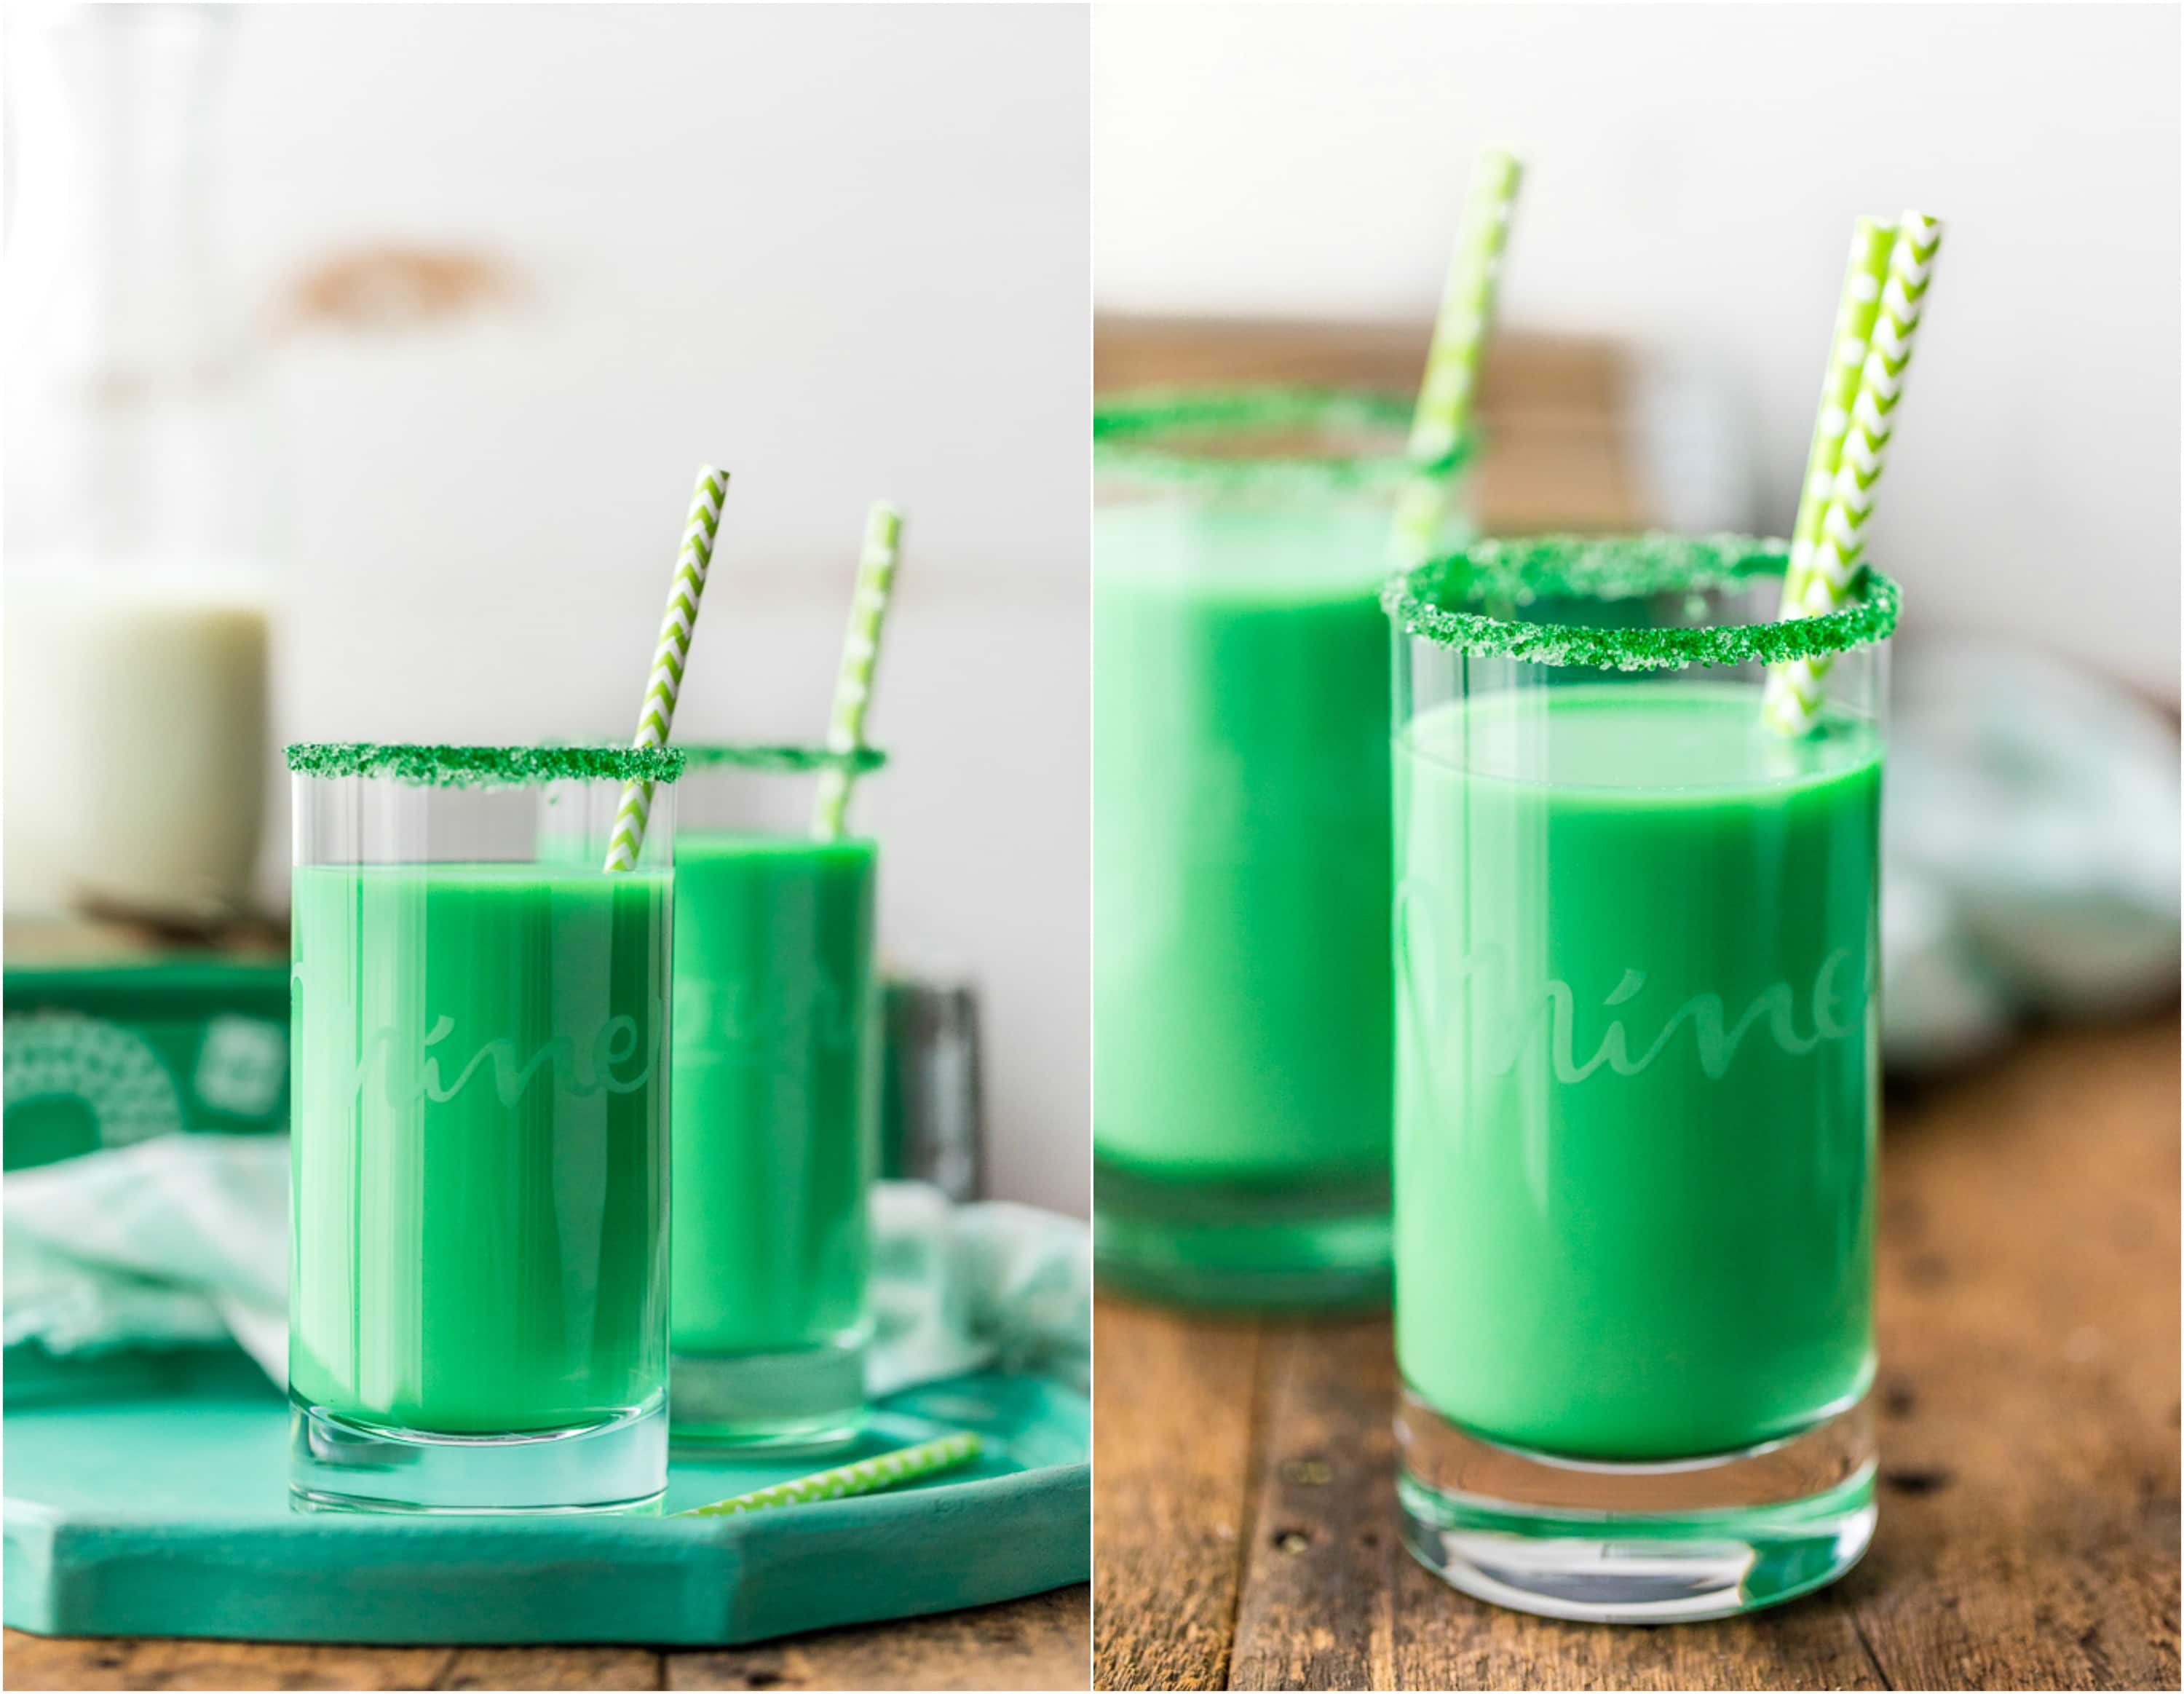 Make the kids extra happy on St. Patrick's Day with Vanilla Mint Green Milk! We make Leprechaun Milk every St Patricks Day! So fun and tasty too. Vanilla Mint Milk for the win!